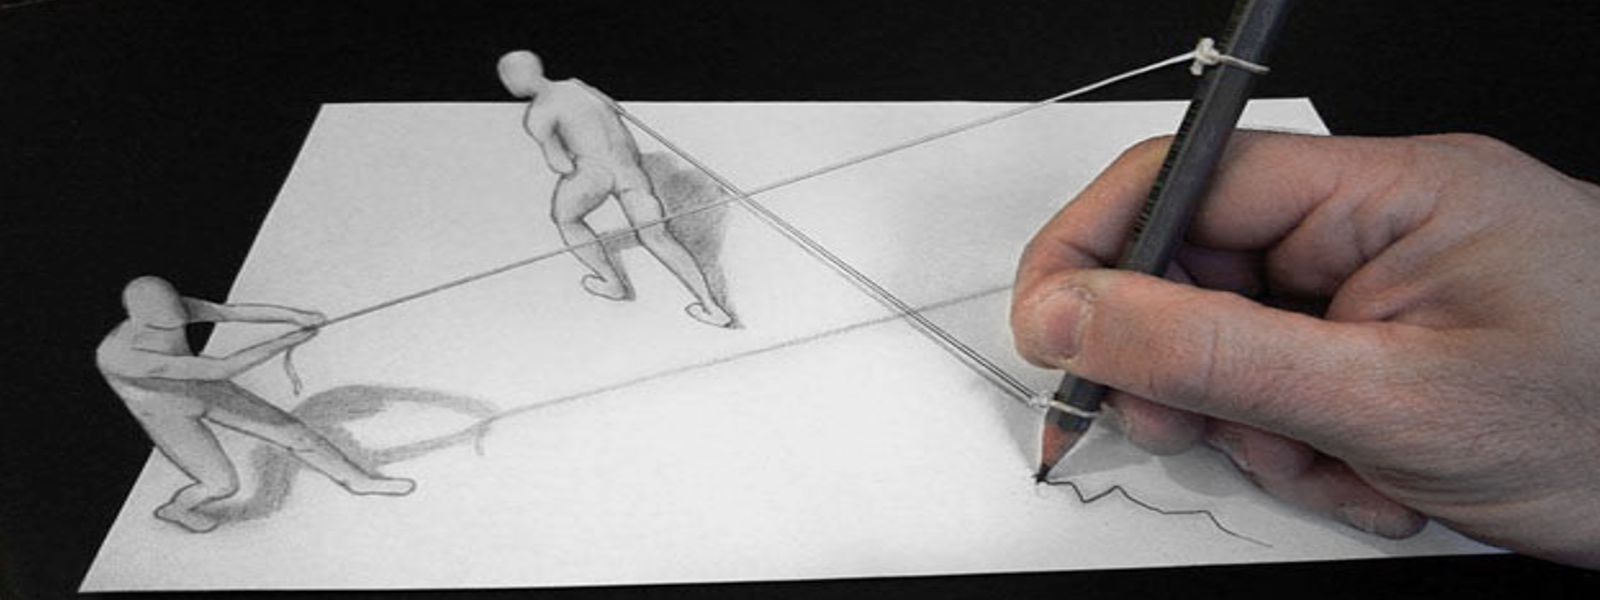 Drawing with a pencil